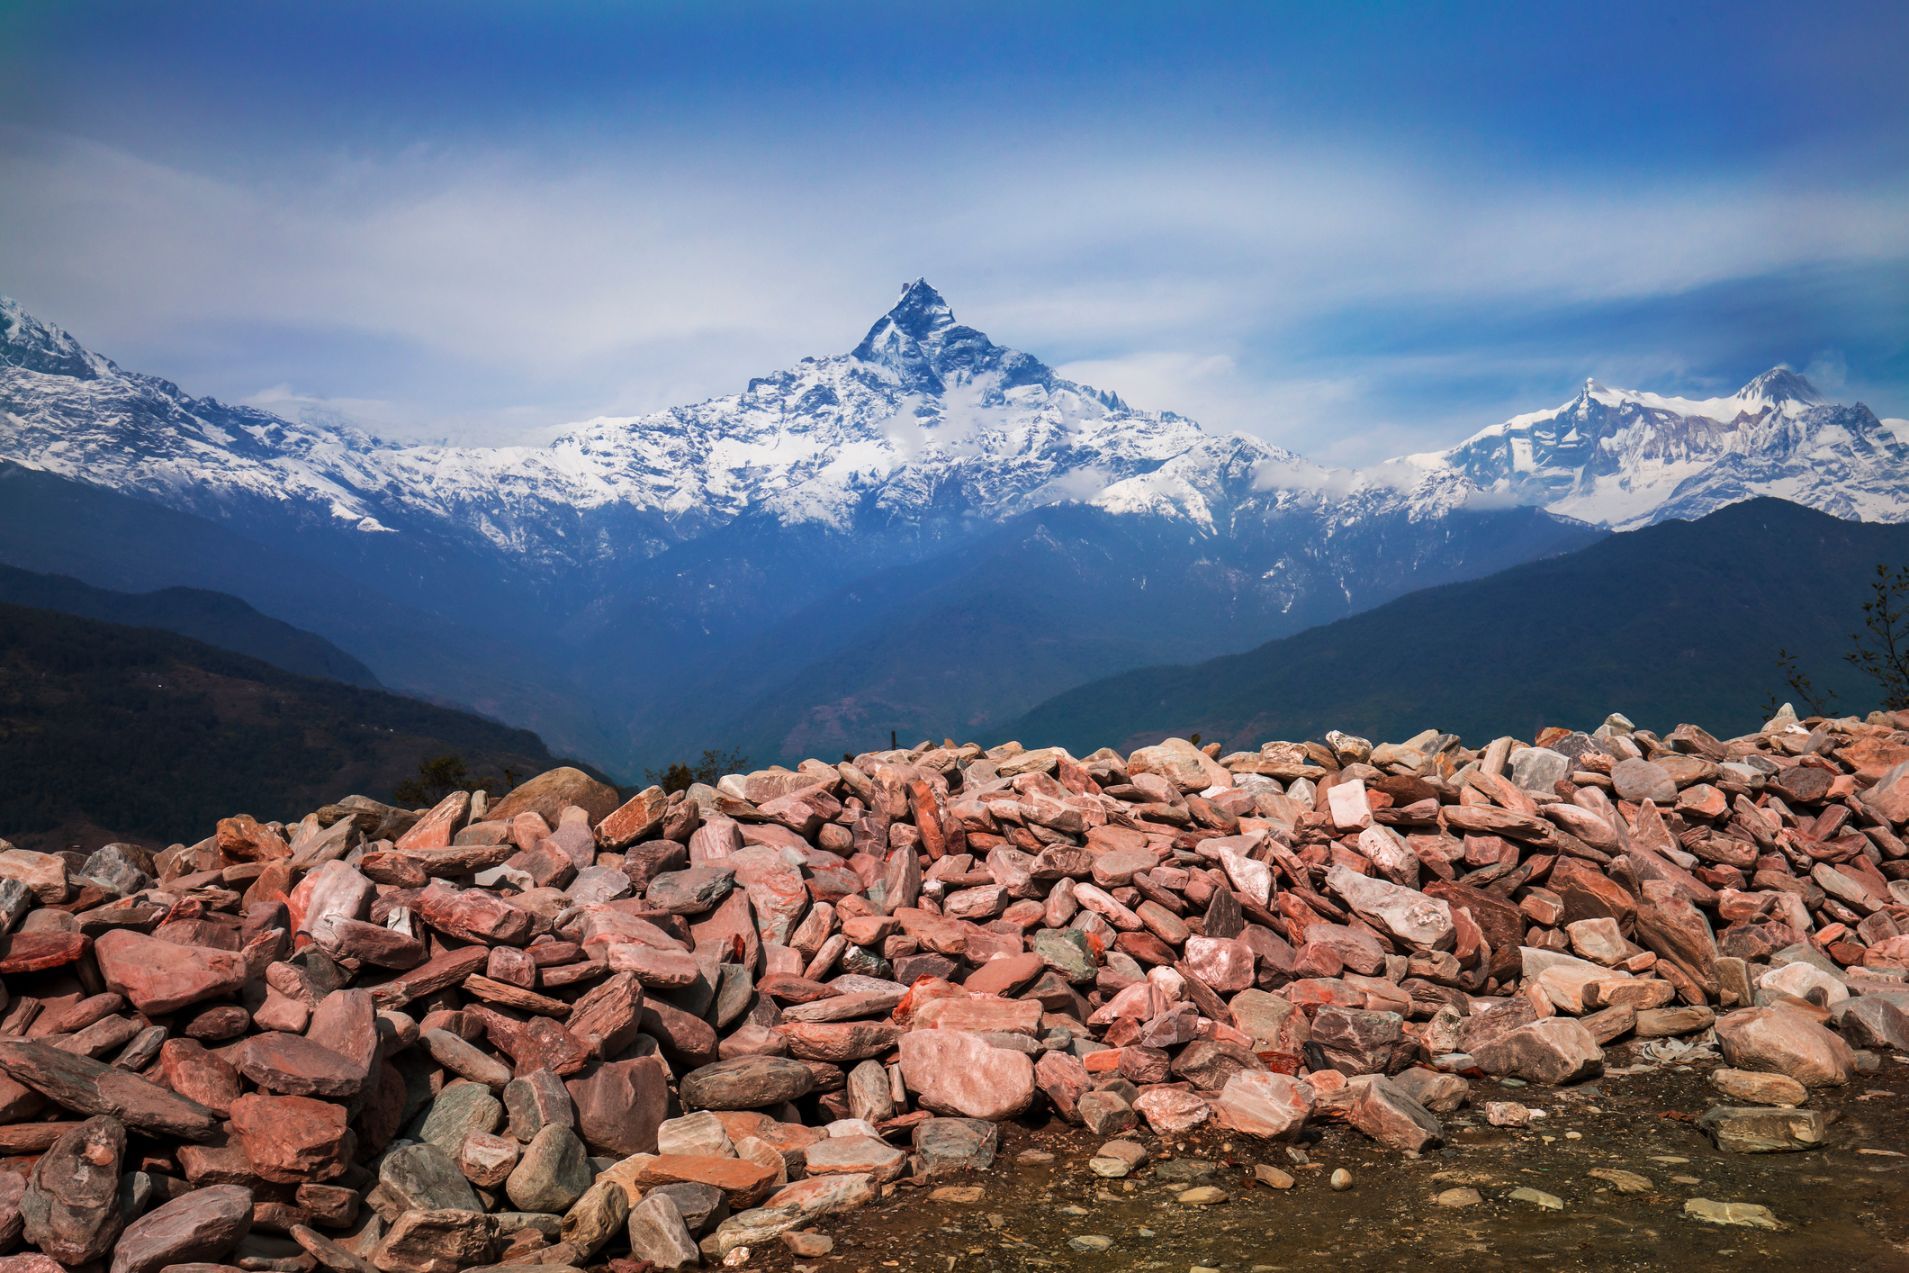 A beautiful evening view from the Dhampus trek in Nepal.